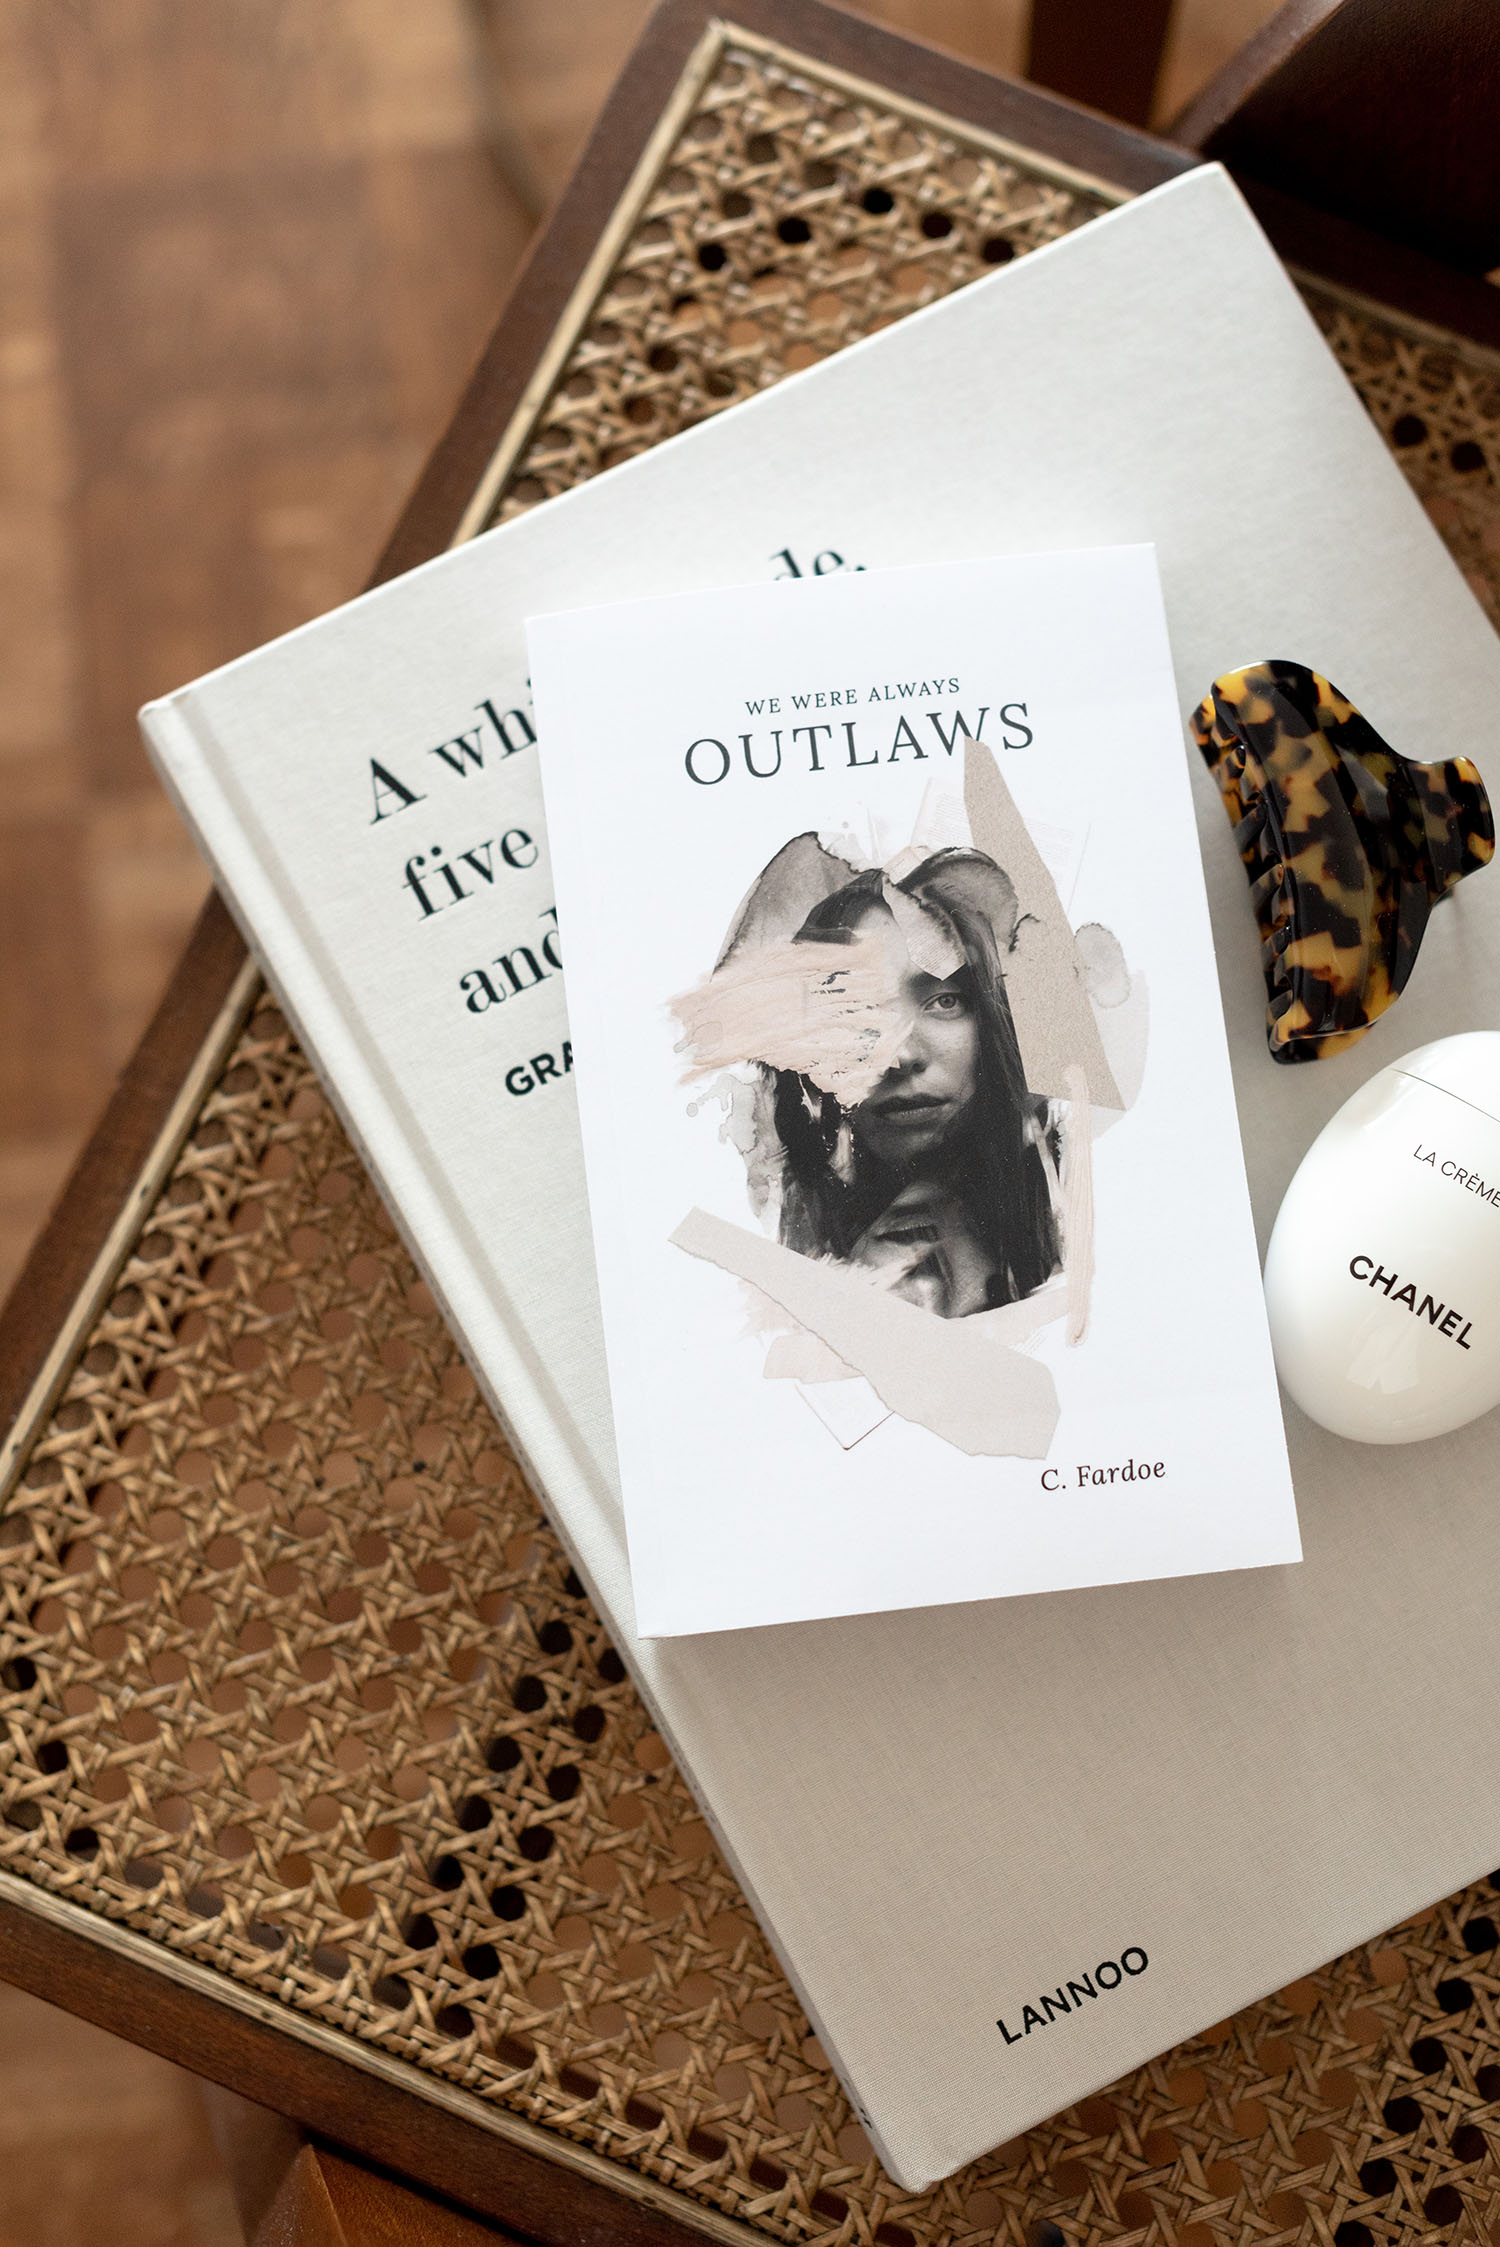 Coco & Vera - We Were Always Outlaws novel by C. Fardoe on rattan chair next to Chelsea King tortoise hair claw